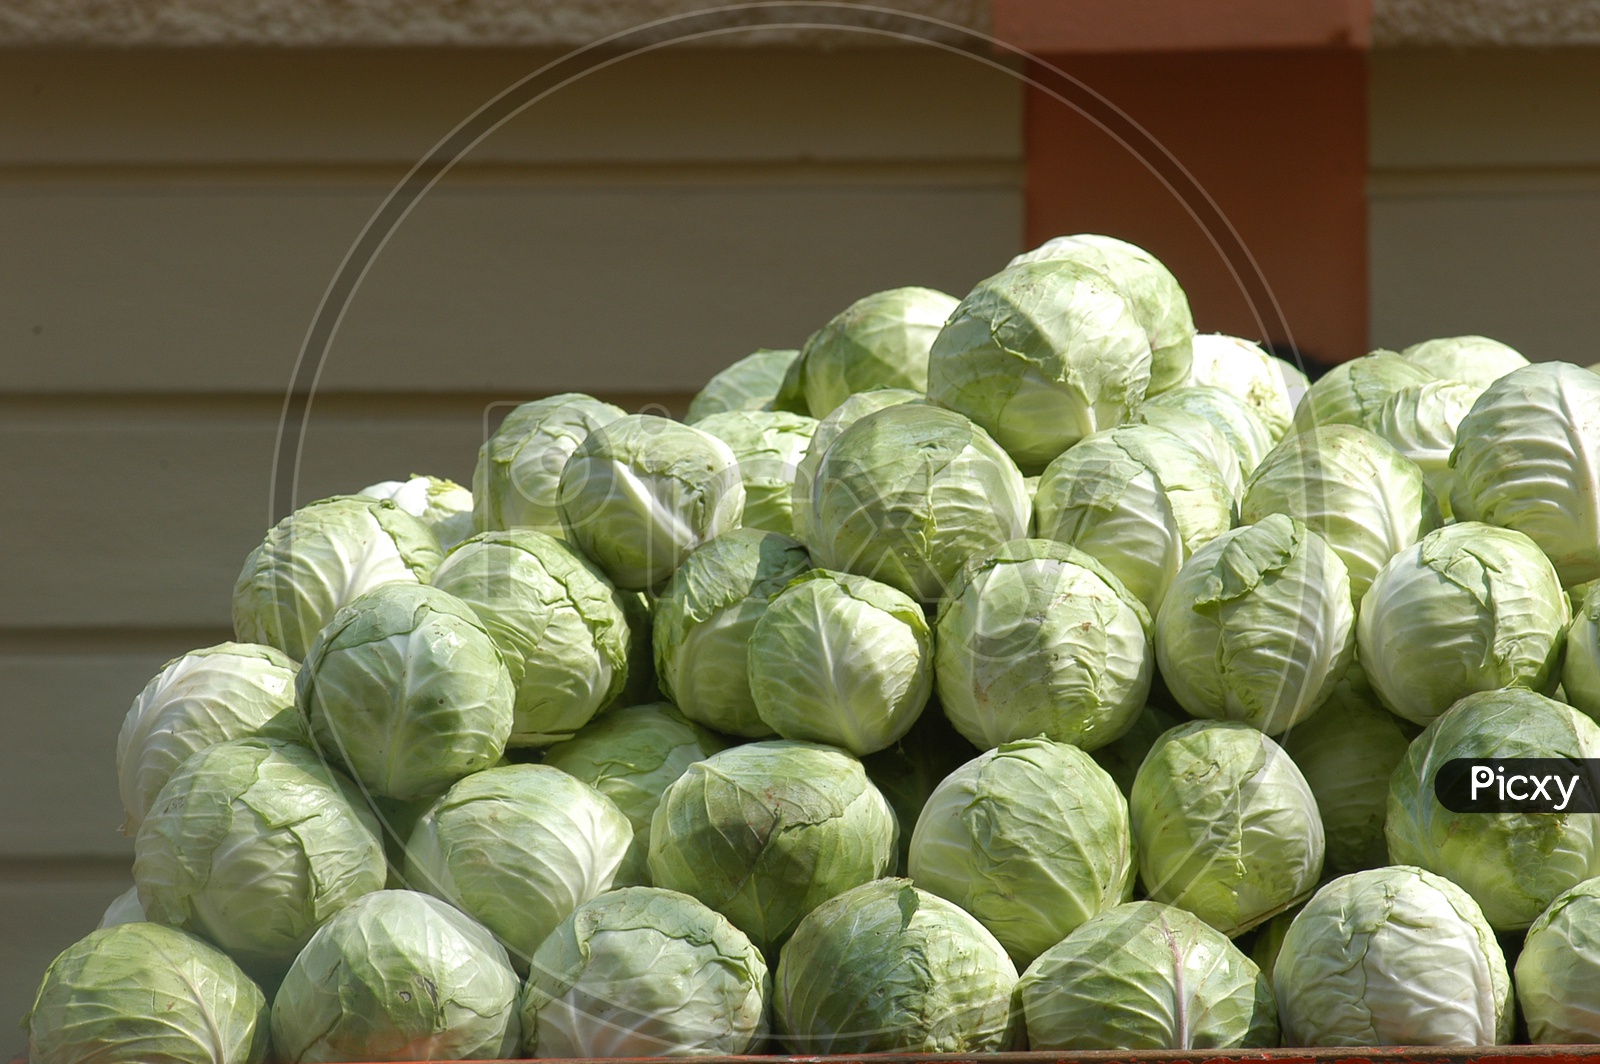 Bunch of cabbages